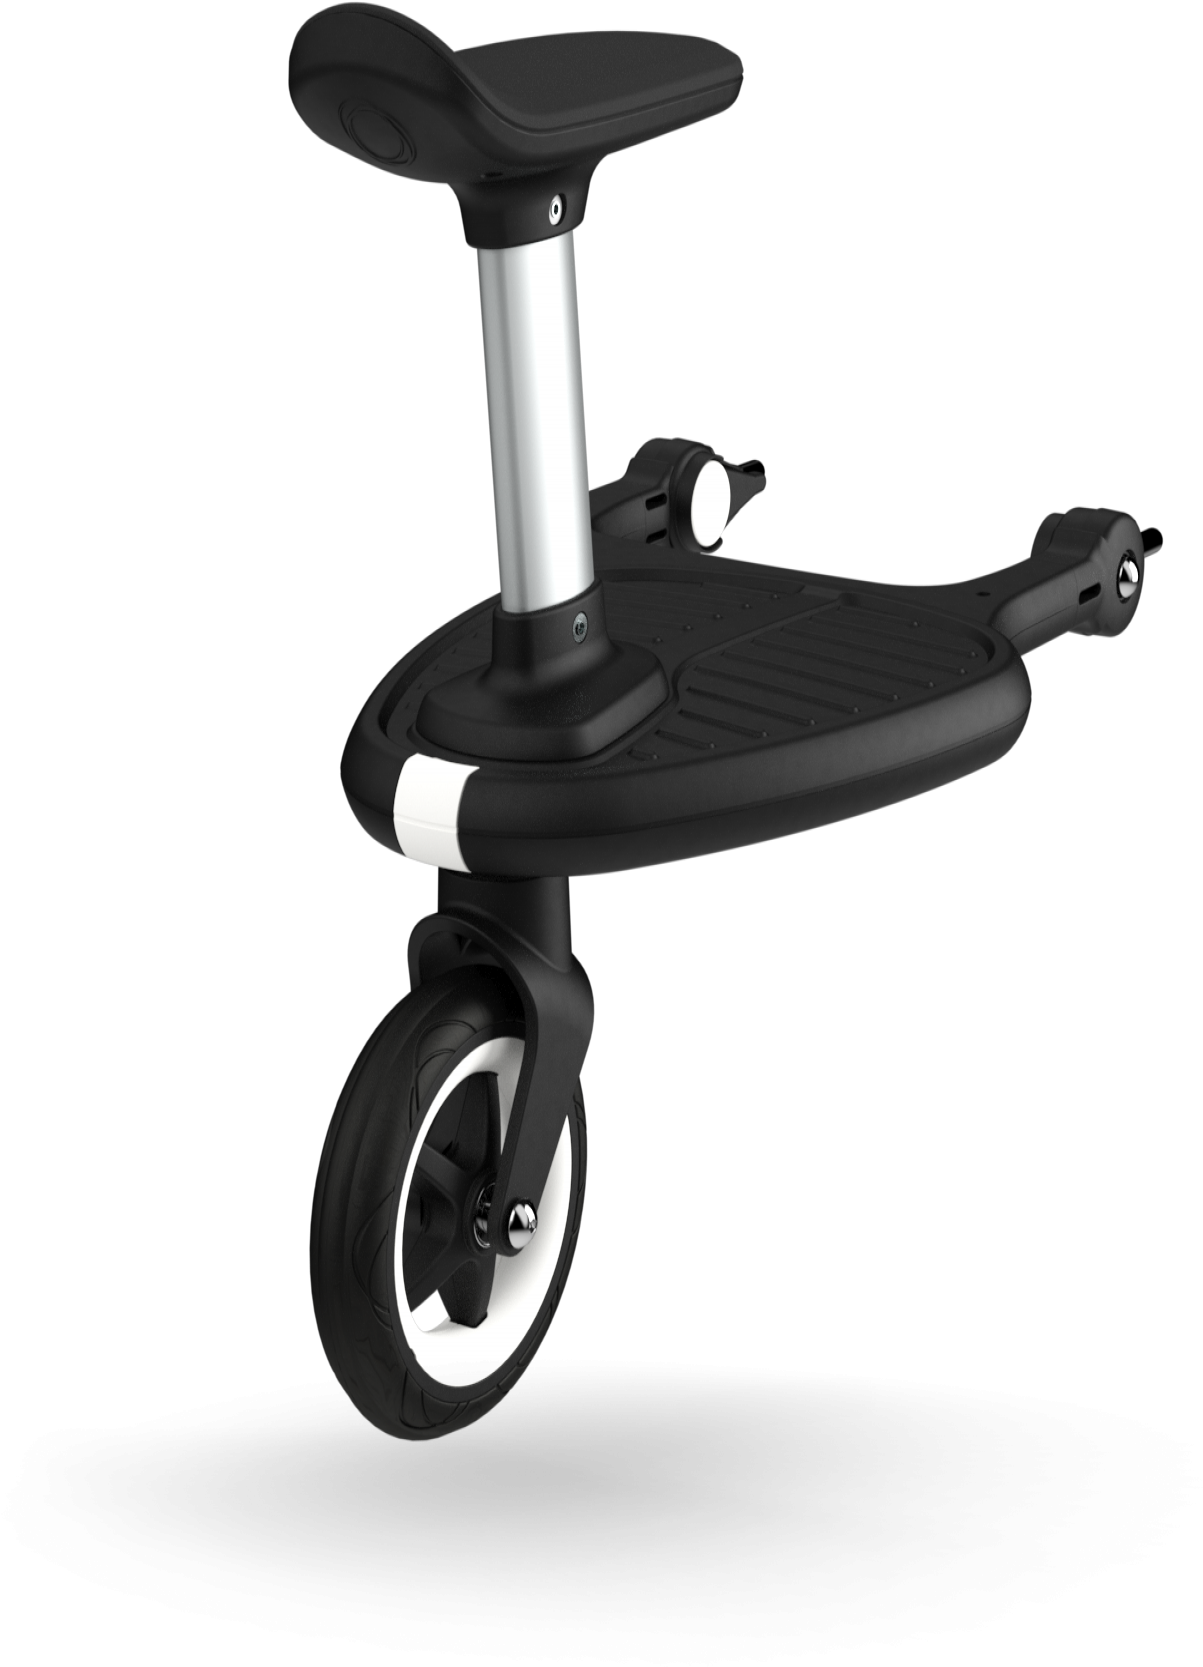 A Black Scooter With A White Wheel